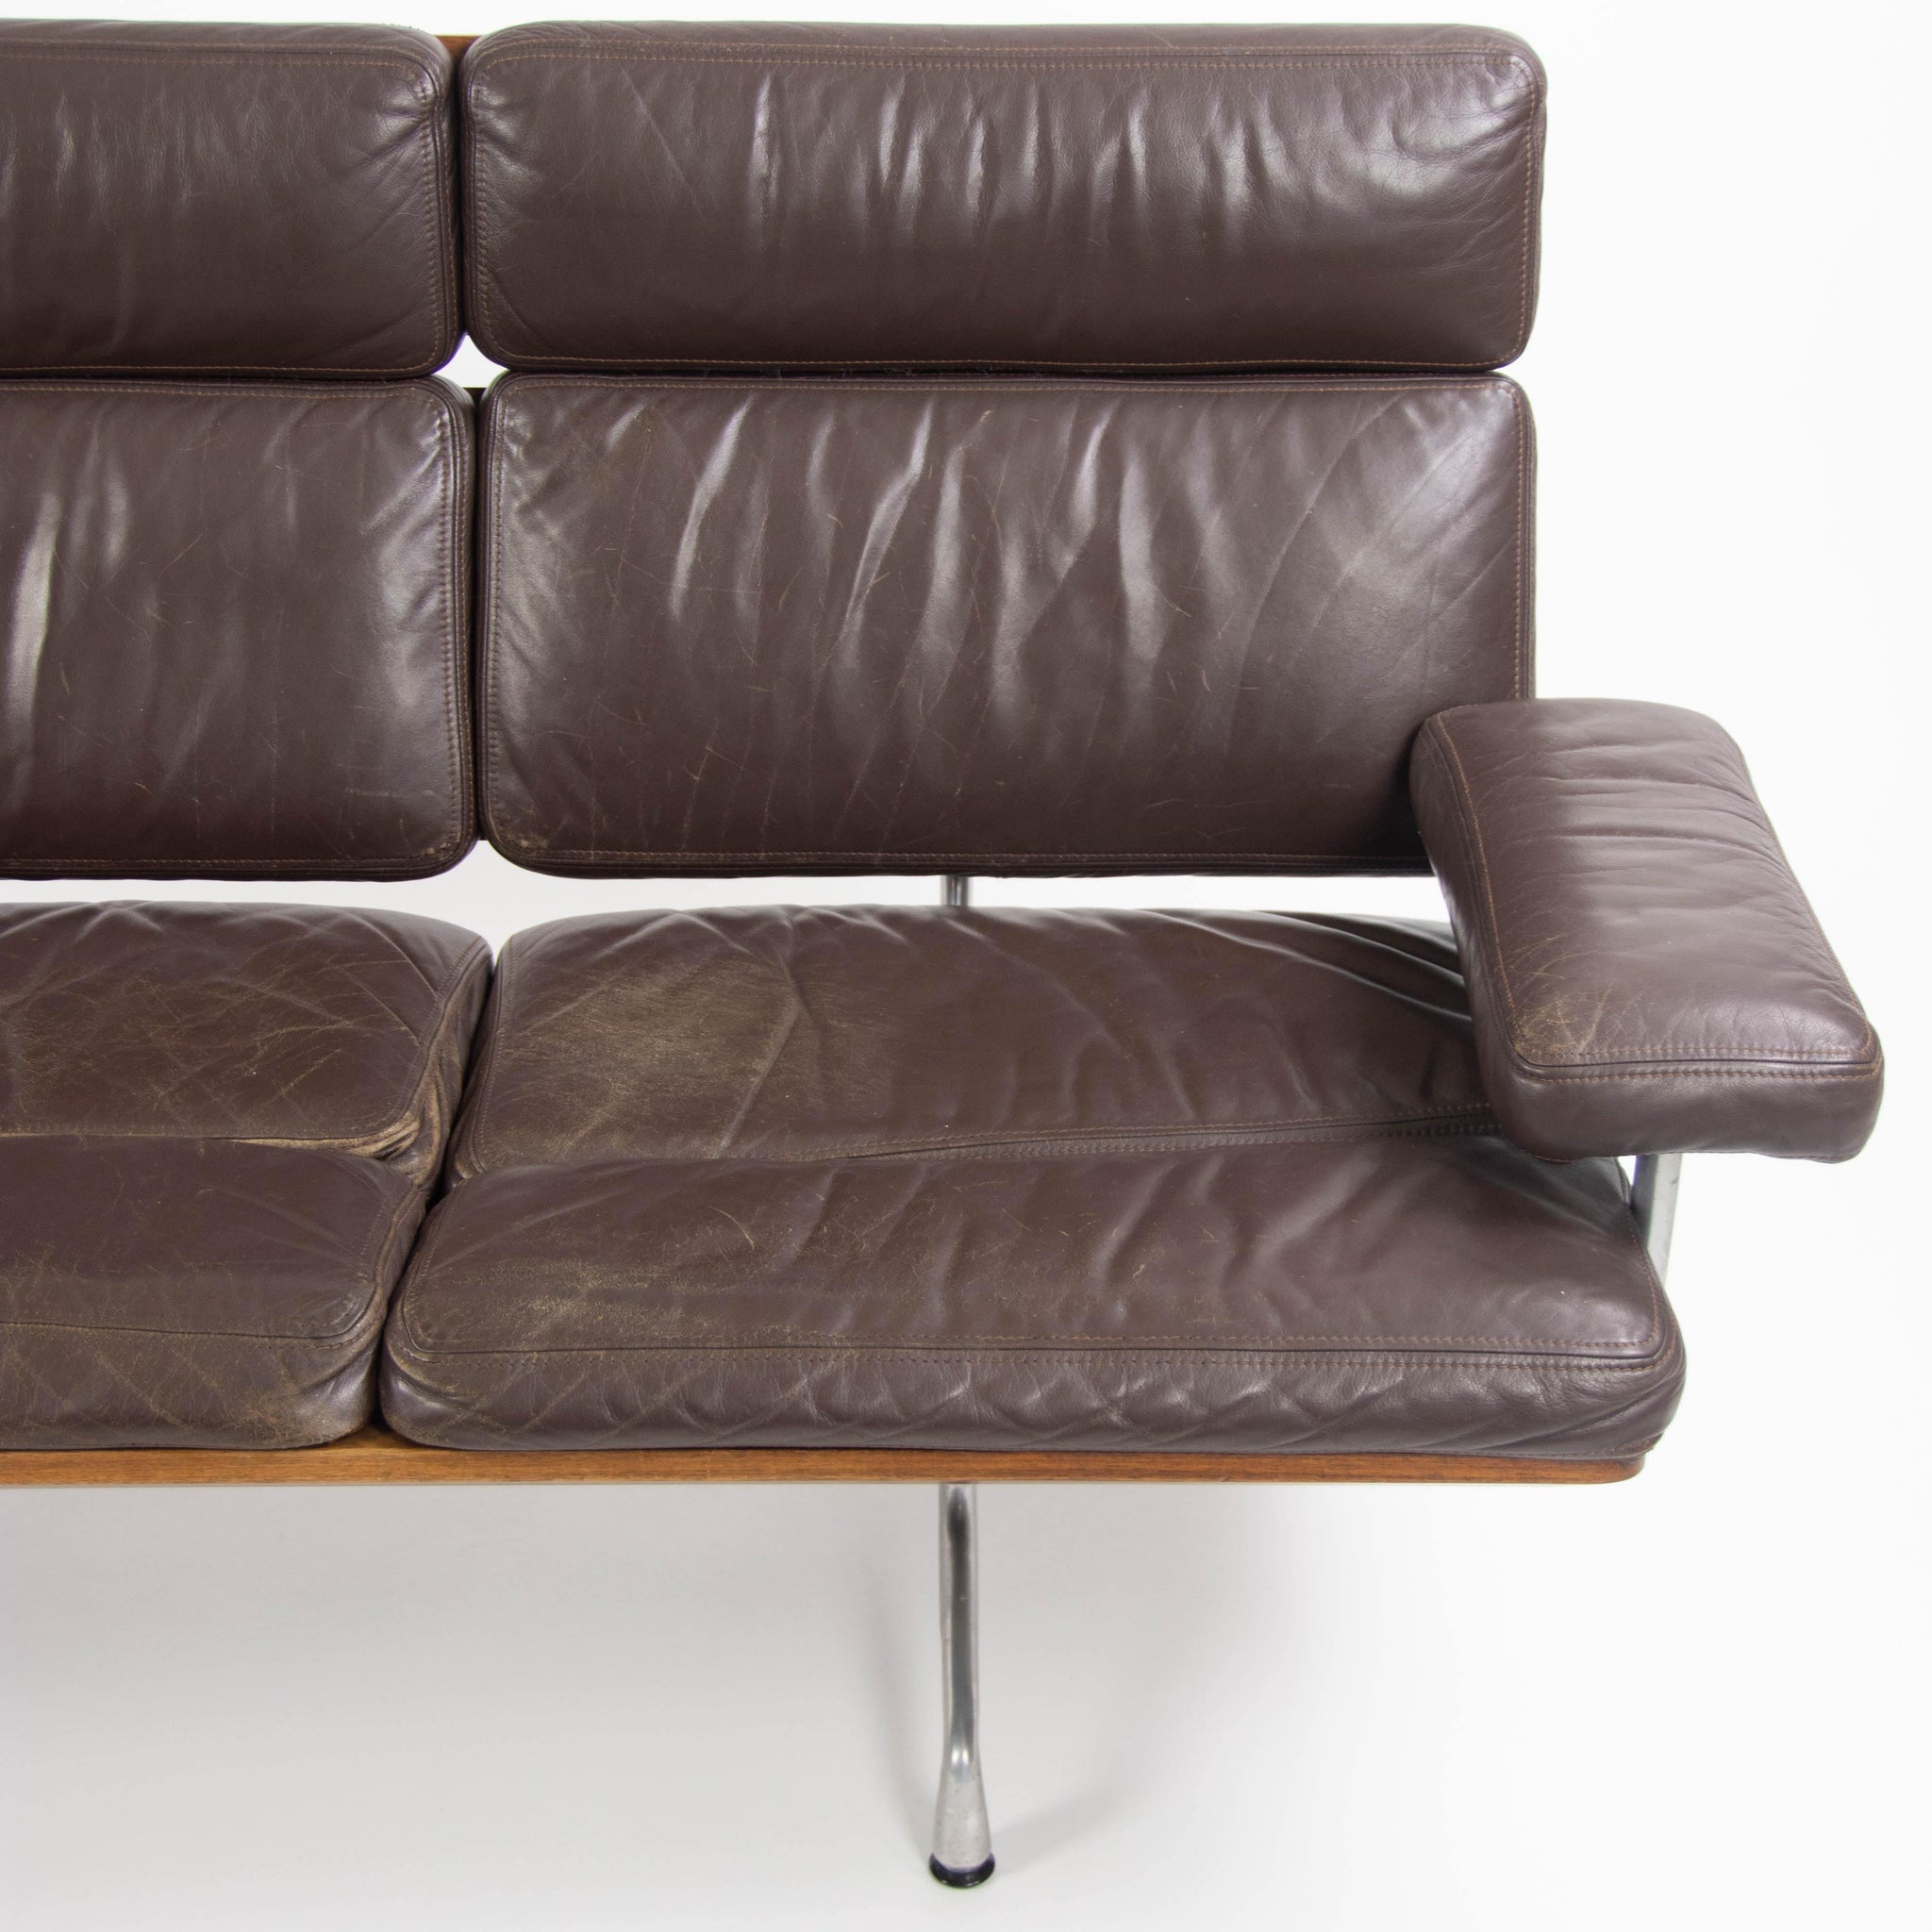 1980s Vintage Eames Herman Miller Three Seater Sofa Walnut and Brown Leather #1 - Rarify Inc.